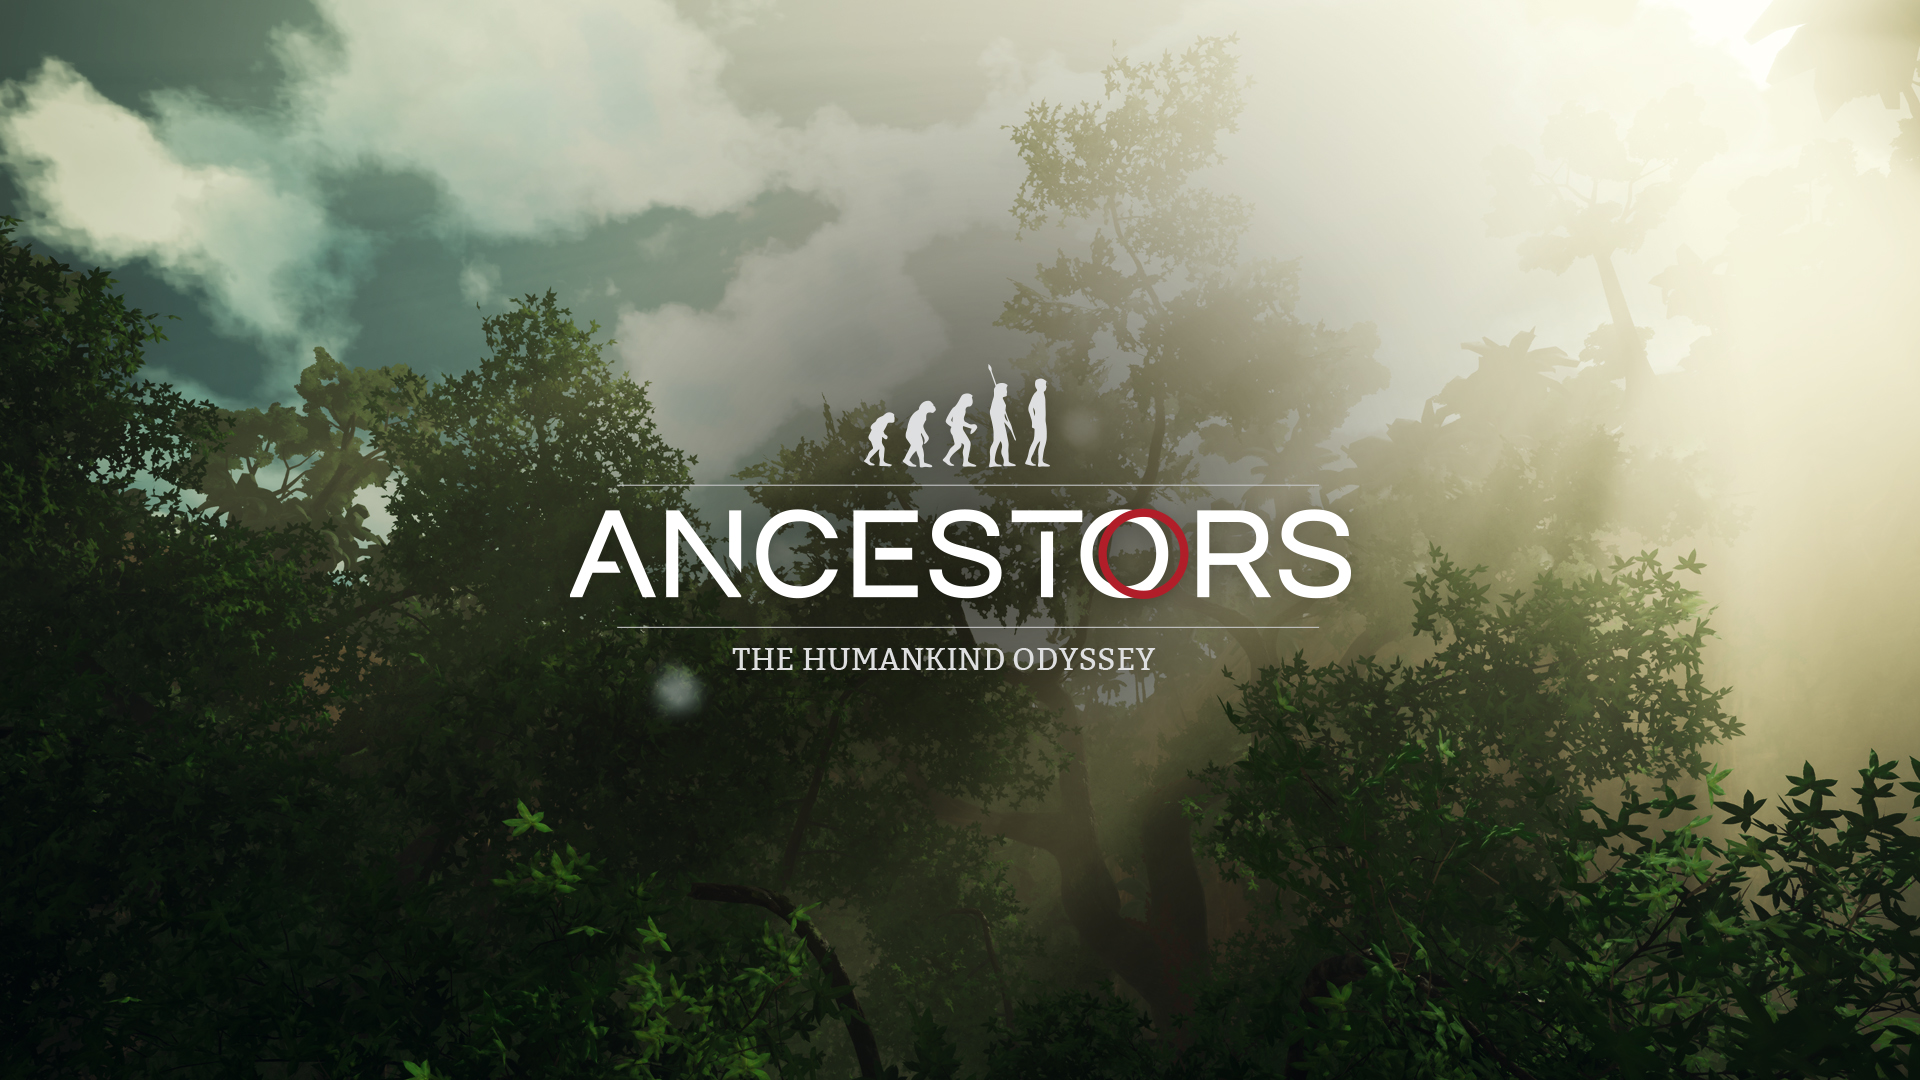 Ancestors: Humankind Odyssey launches December 6th on Xbox One and PS4. Pre-order now! - Private Division